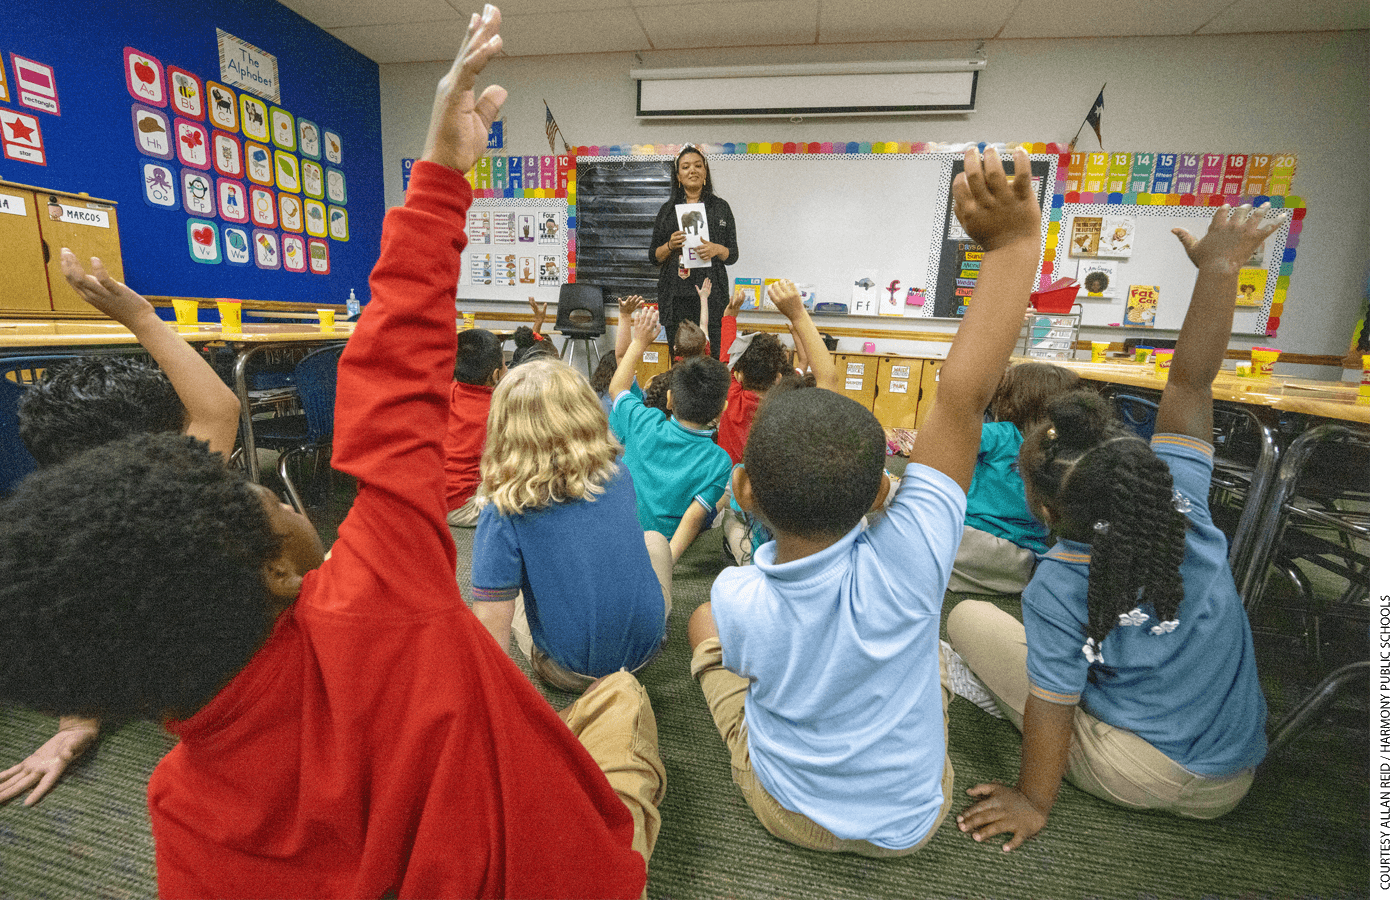 Students participate in a reading lesson at Harmony Science Academy in Waco, one of 62 schools in the Harmony Public Schools charter network that serve 40,000 Texas students.